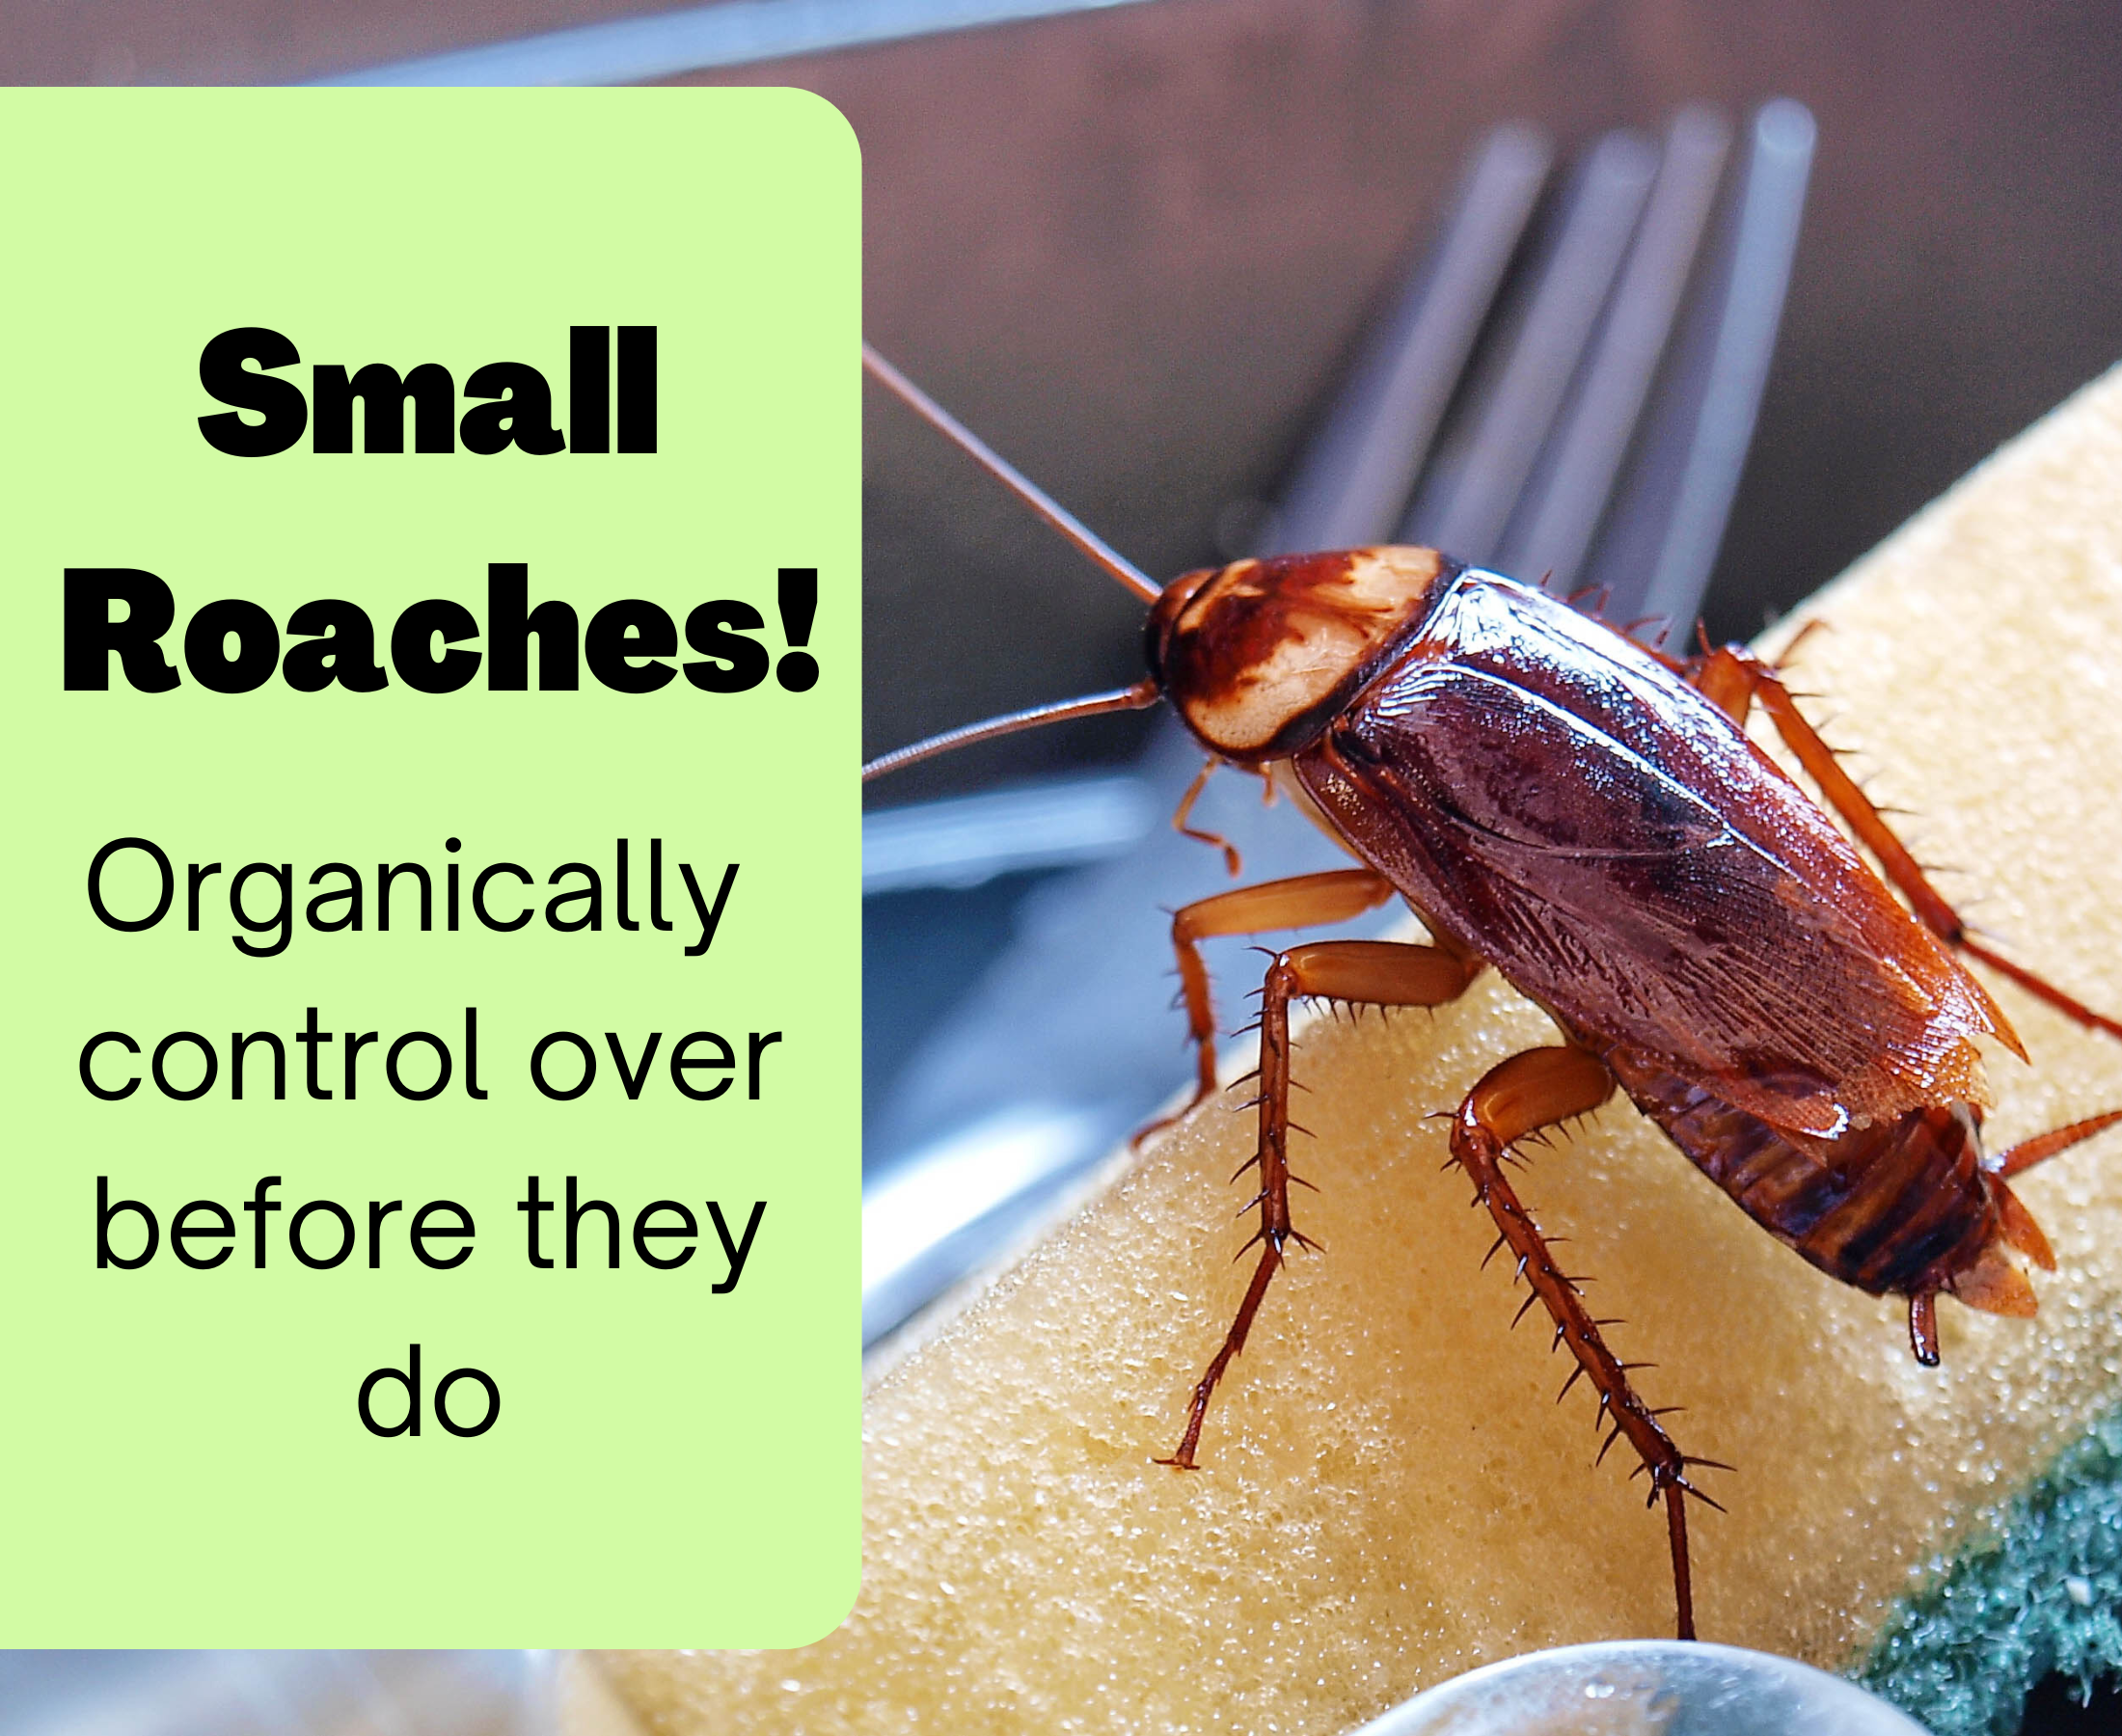 Small roaches are troublemaker! How to kill small roaches fastest?